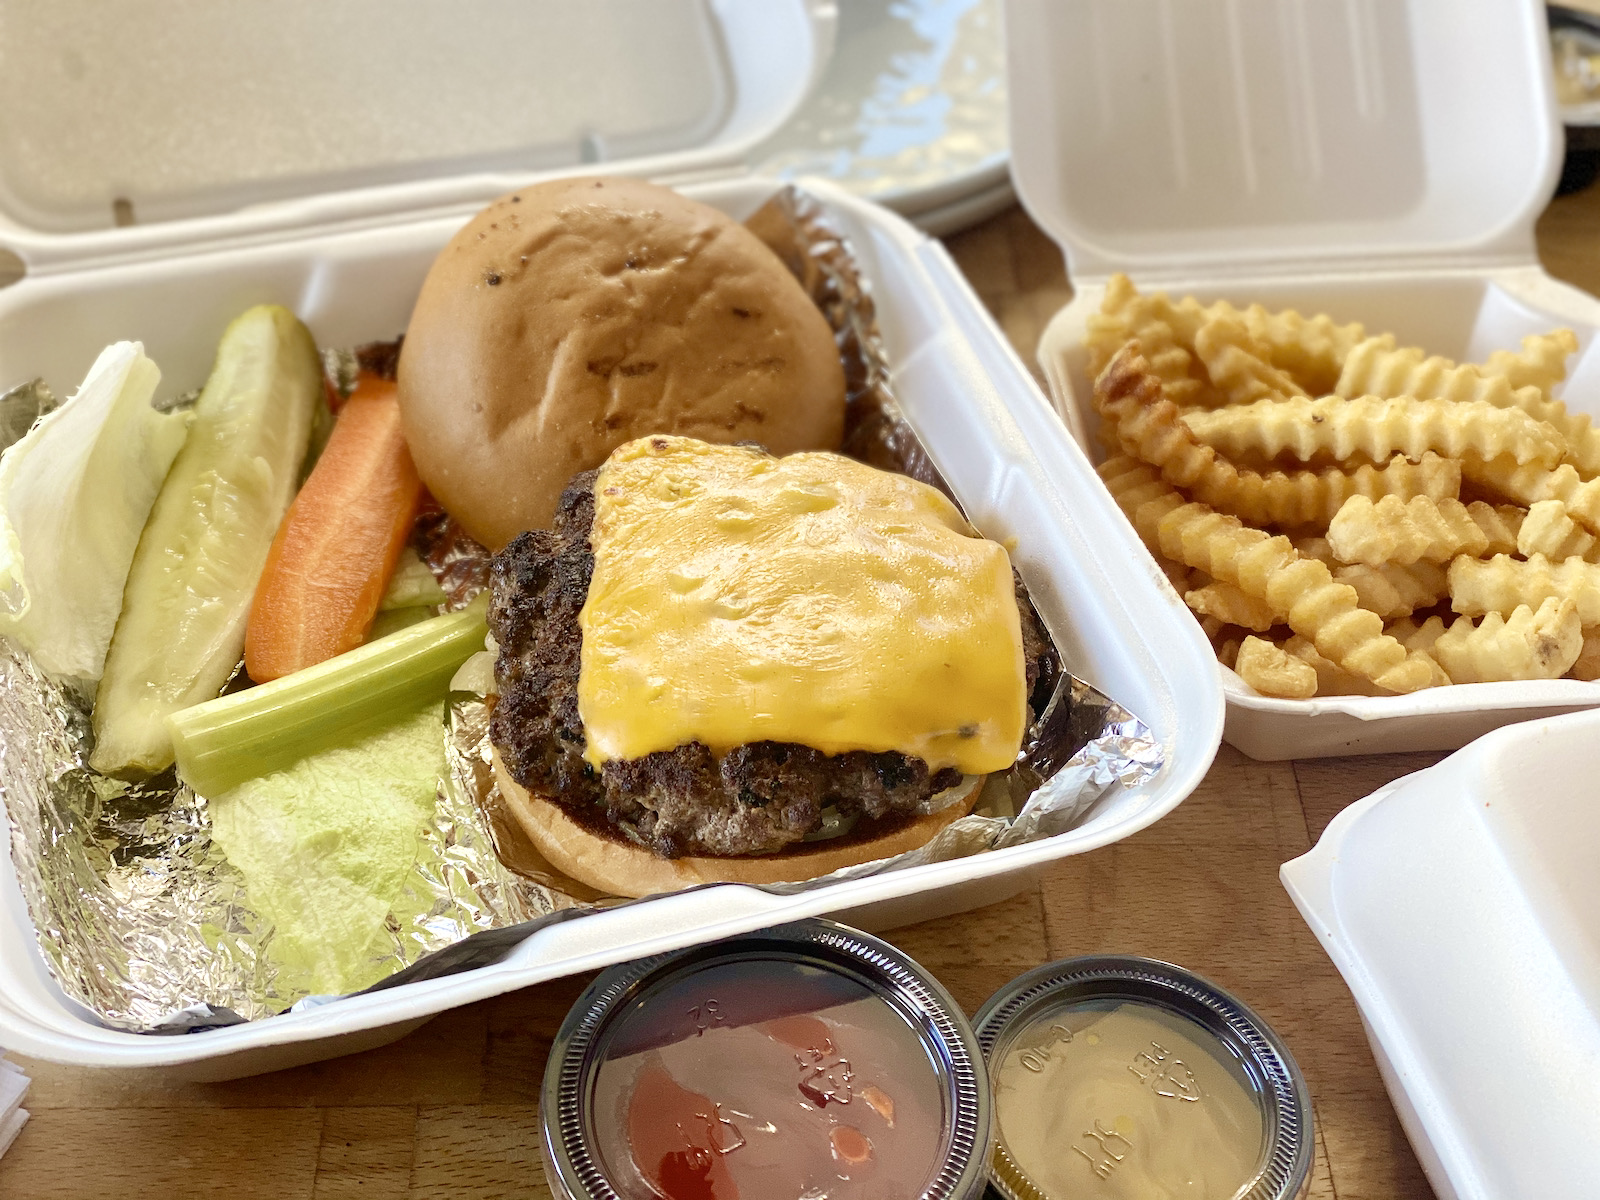 Alioto's cheeseburger and fries in to-go packaging